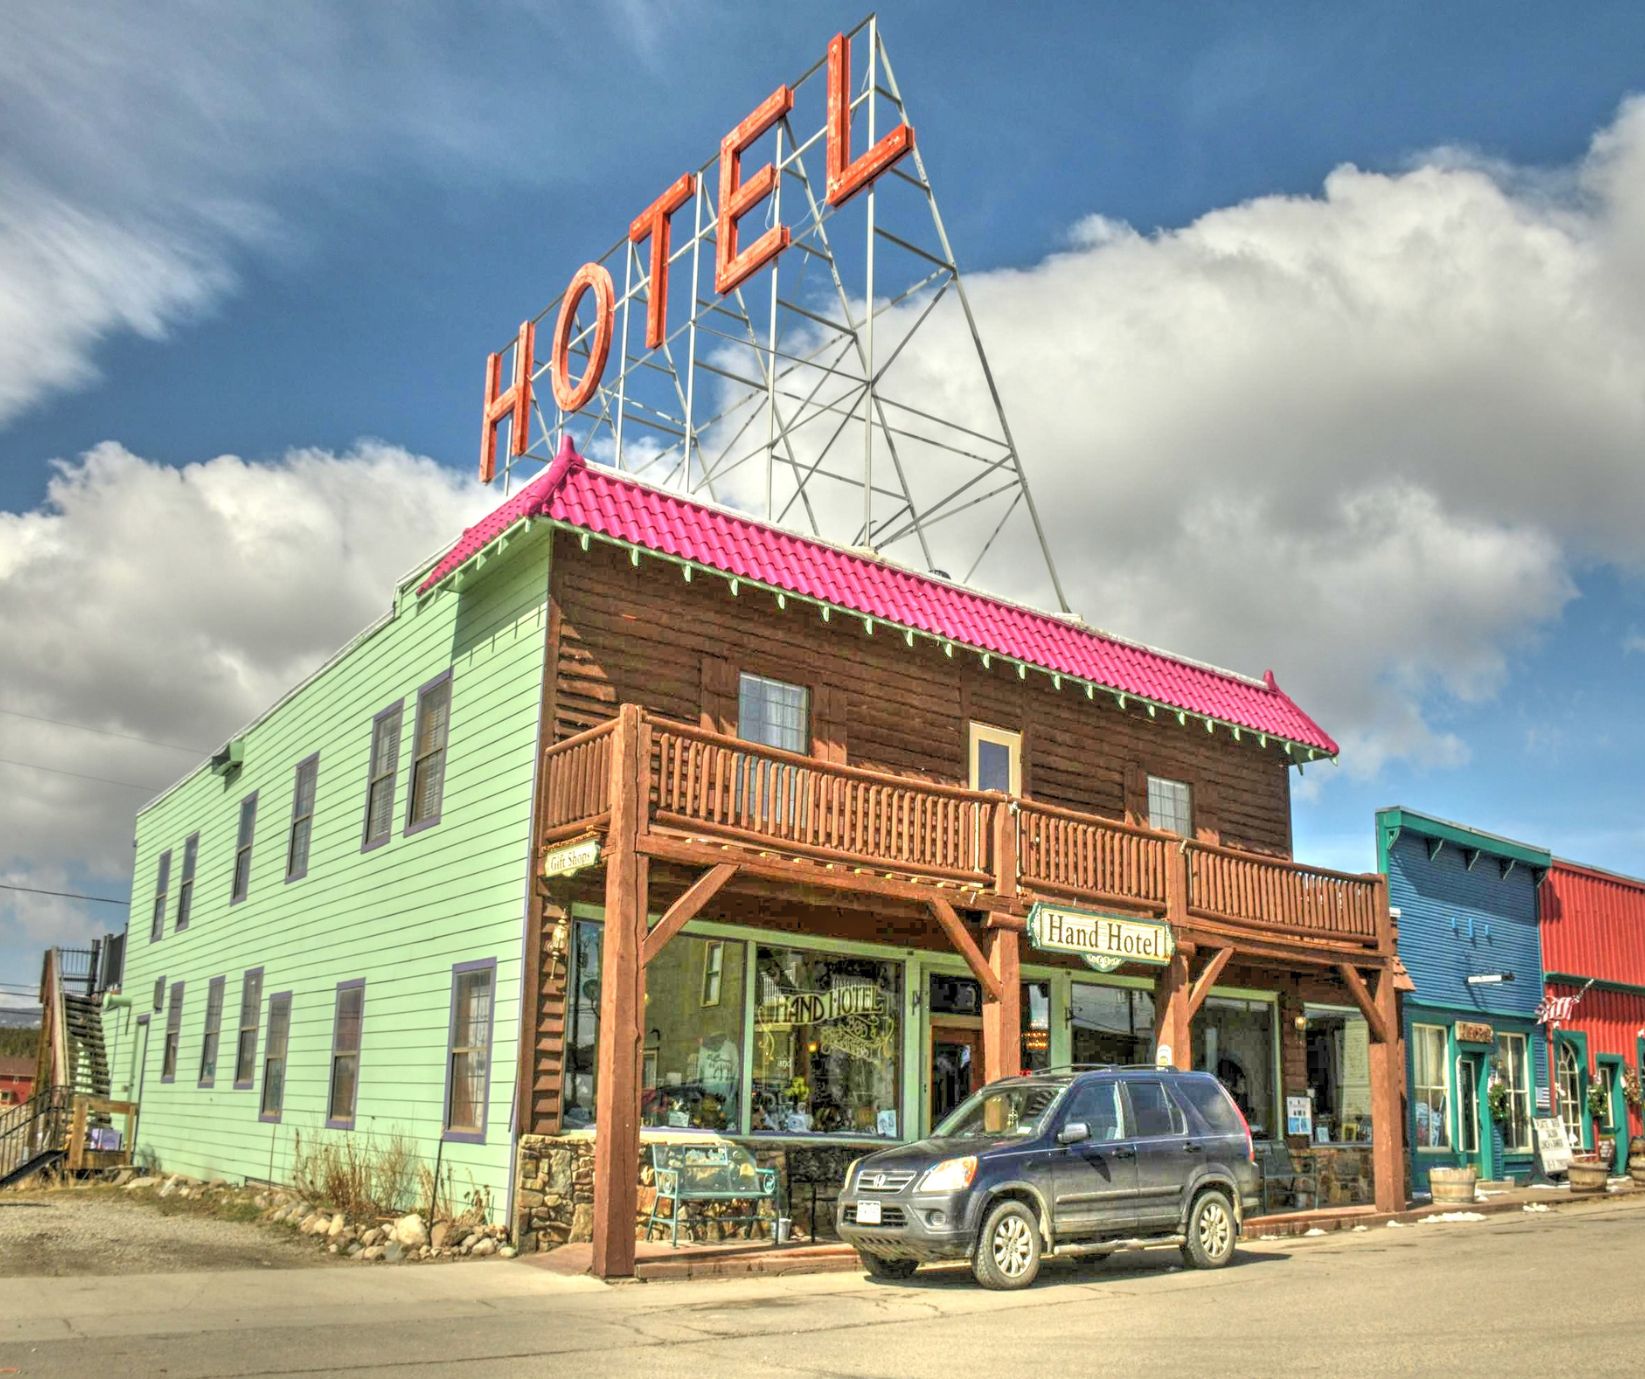 The Historic Hand Hotel in Fairplay, Colorado